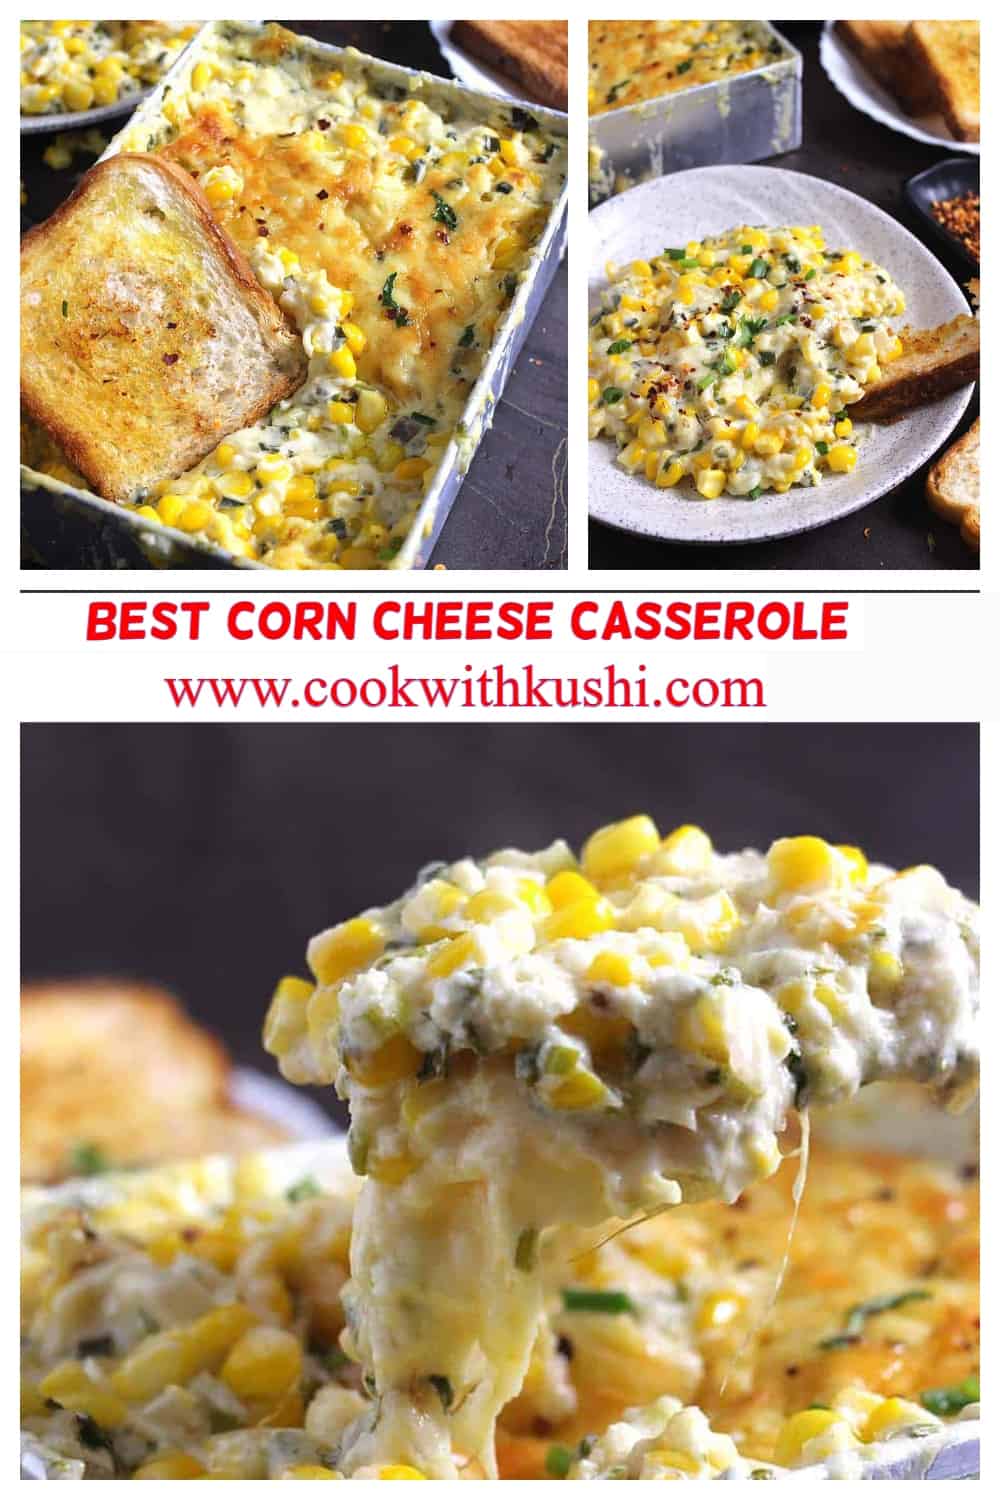 collage of pics showing the ways of serving homemade cheesy baked corn casserole.